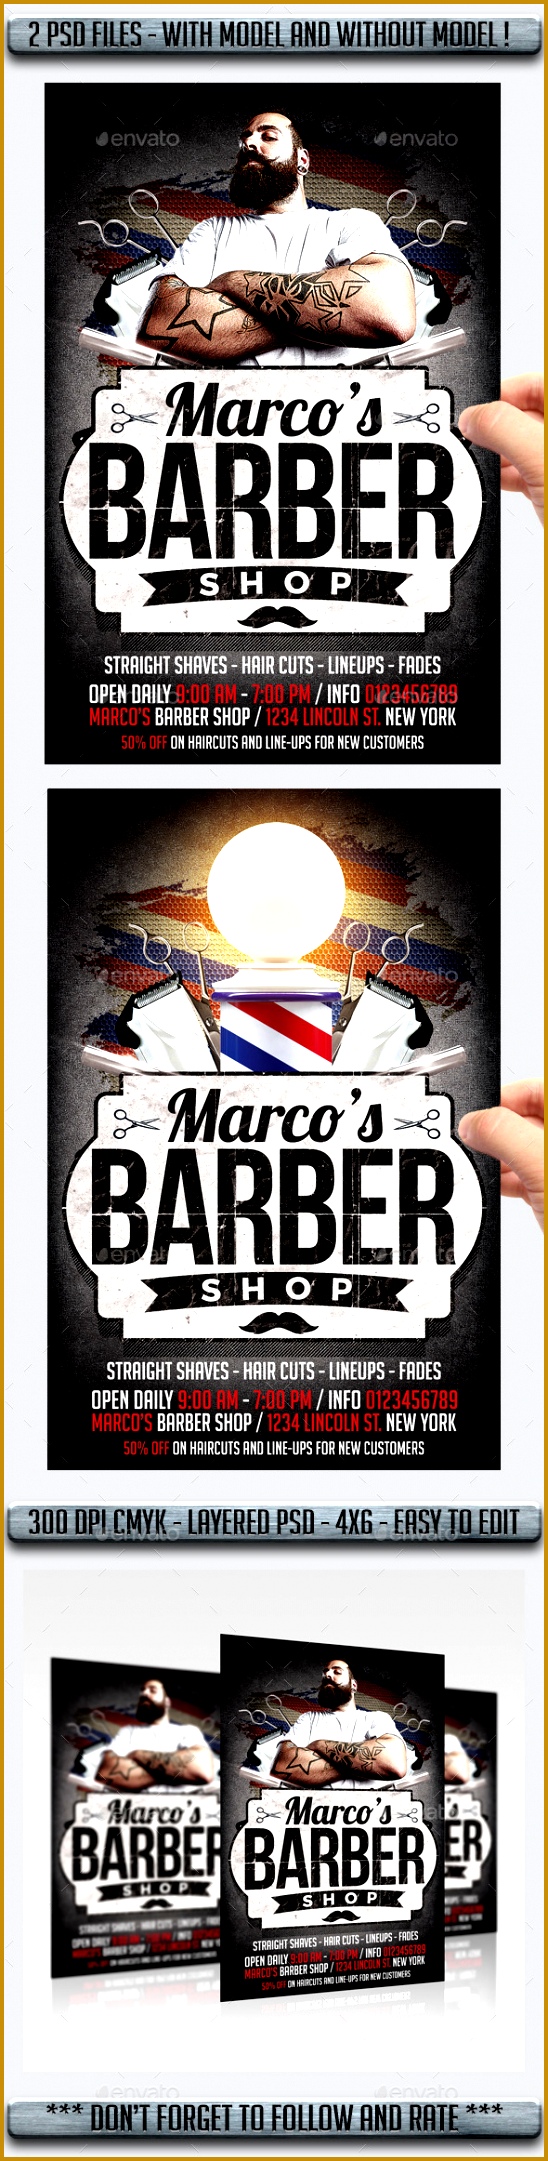 15 excellent flyer templates for your next event Barbershop 2161548